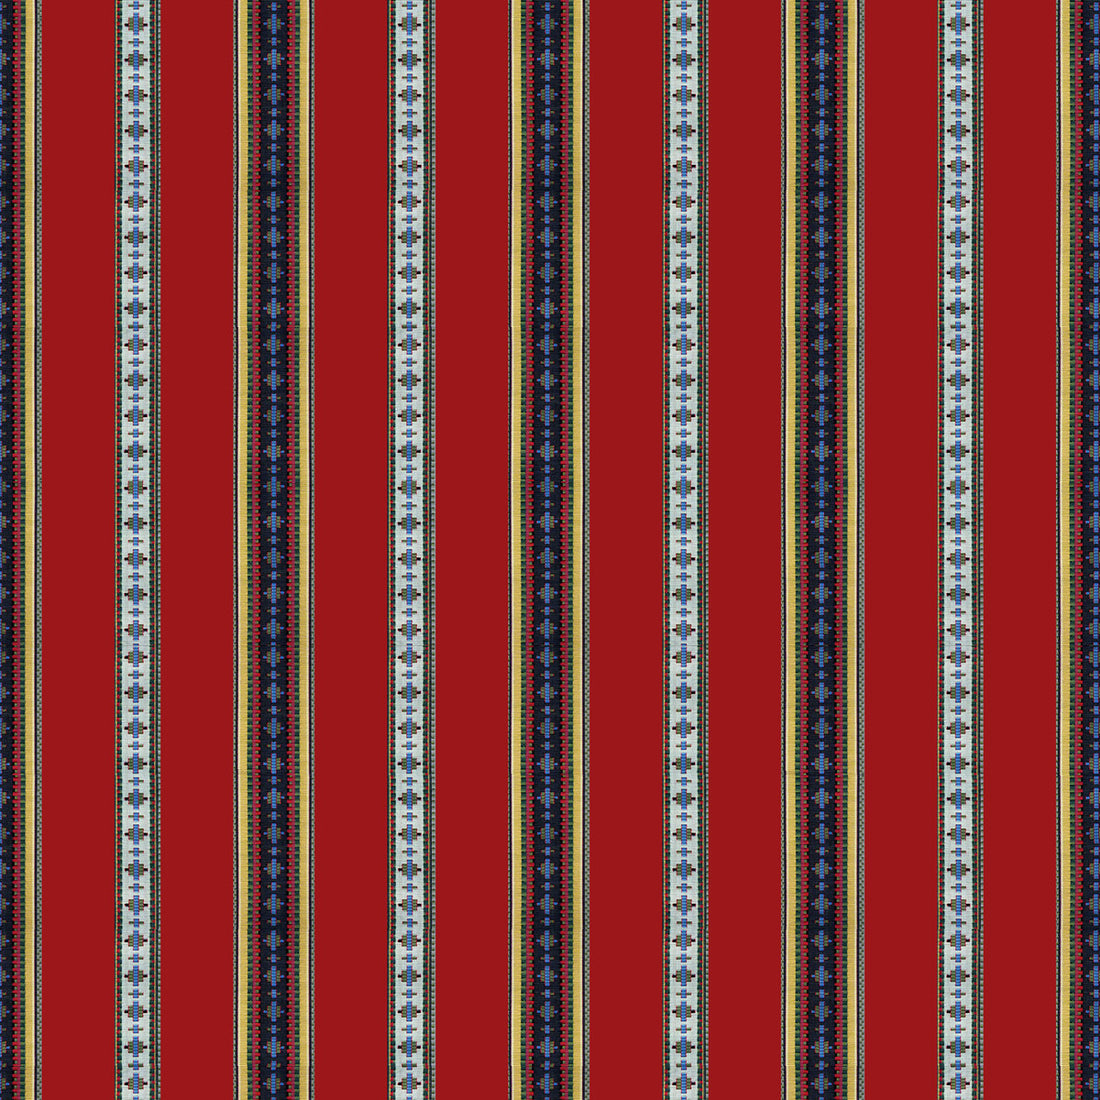 Rayure Broderie fabric in red color - pattern 8015147.19.0 - by Brunschwig &amp; Fils in the Madeleine Castaing collection